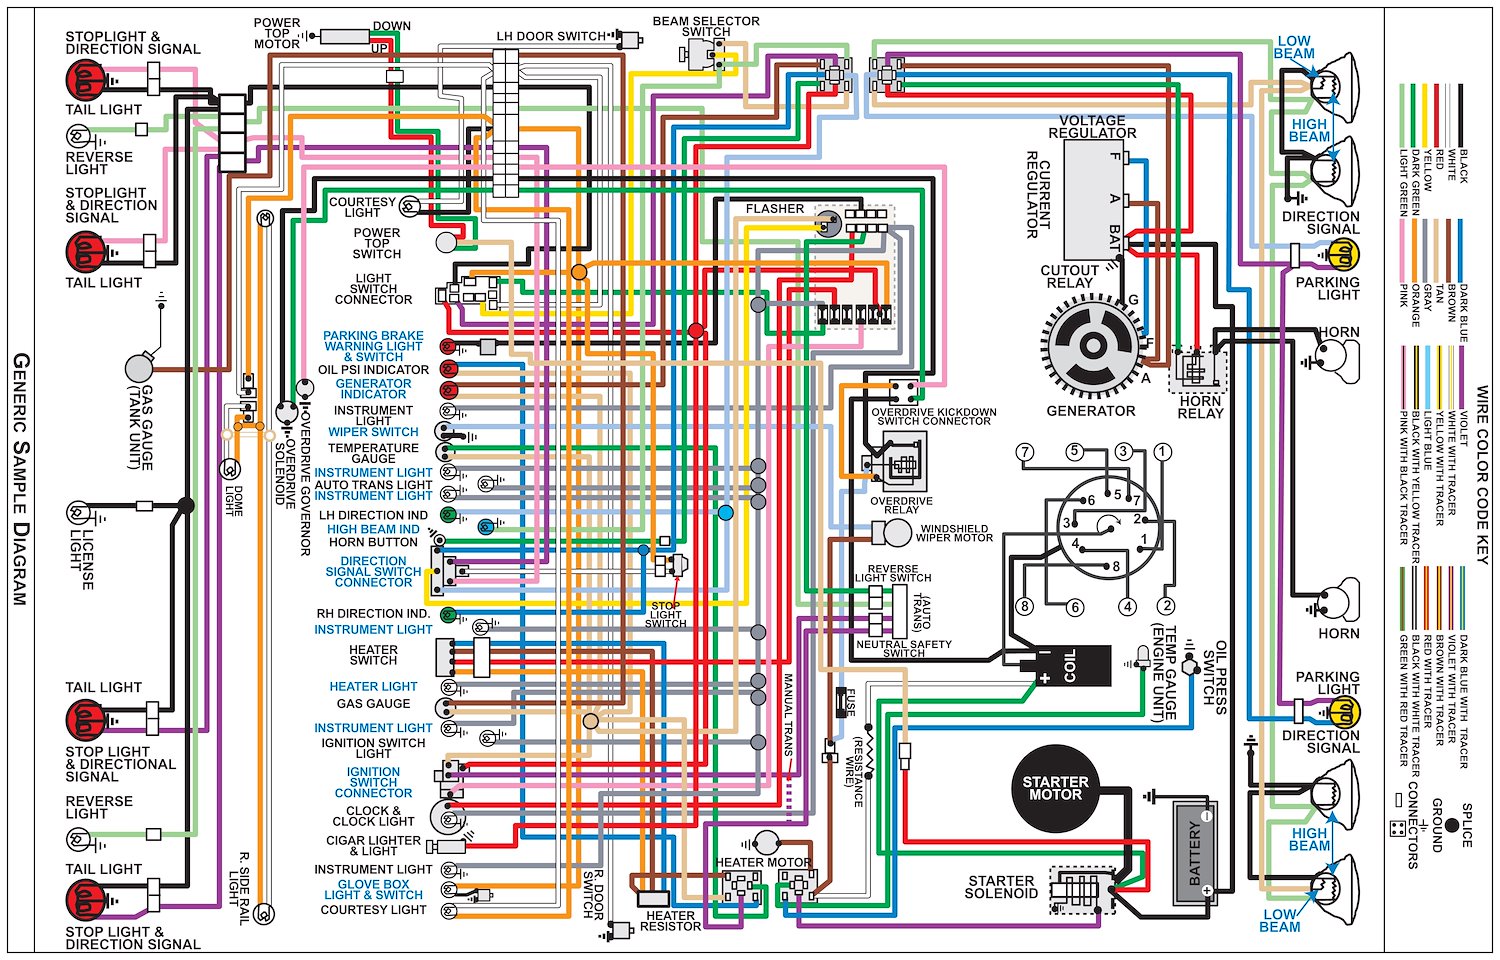 Wiring Diagram for 1950 Plymouth Car, 11 in x 17 in., Laminated